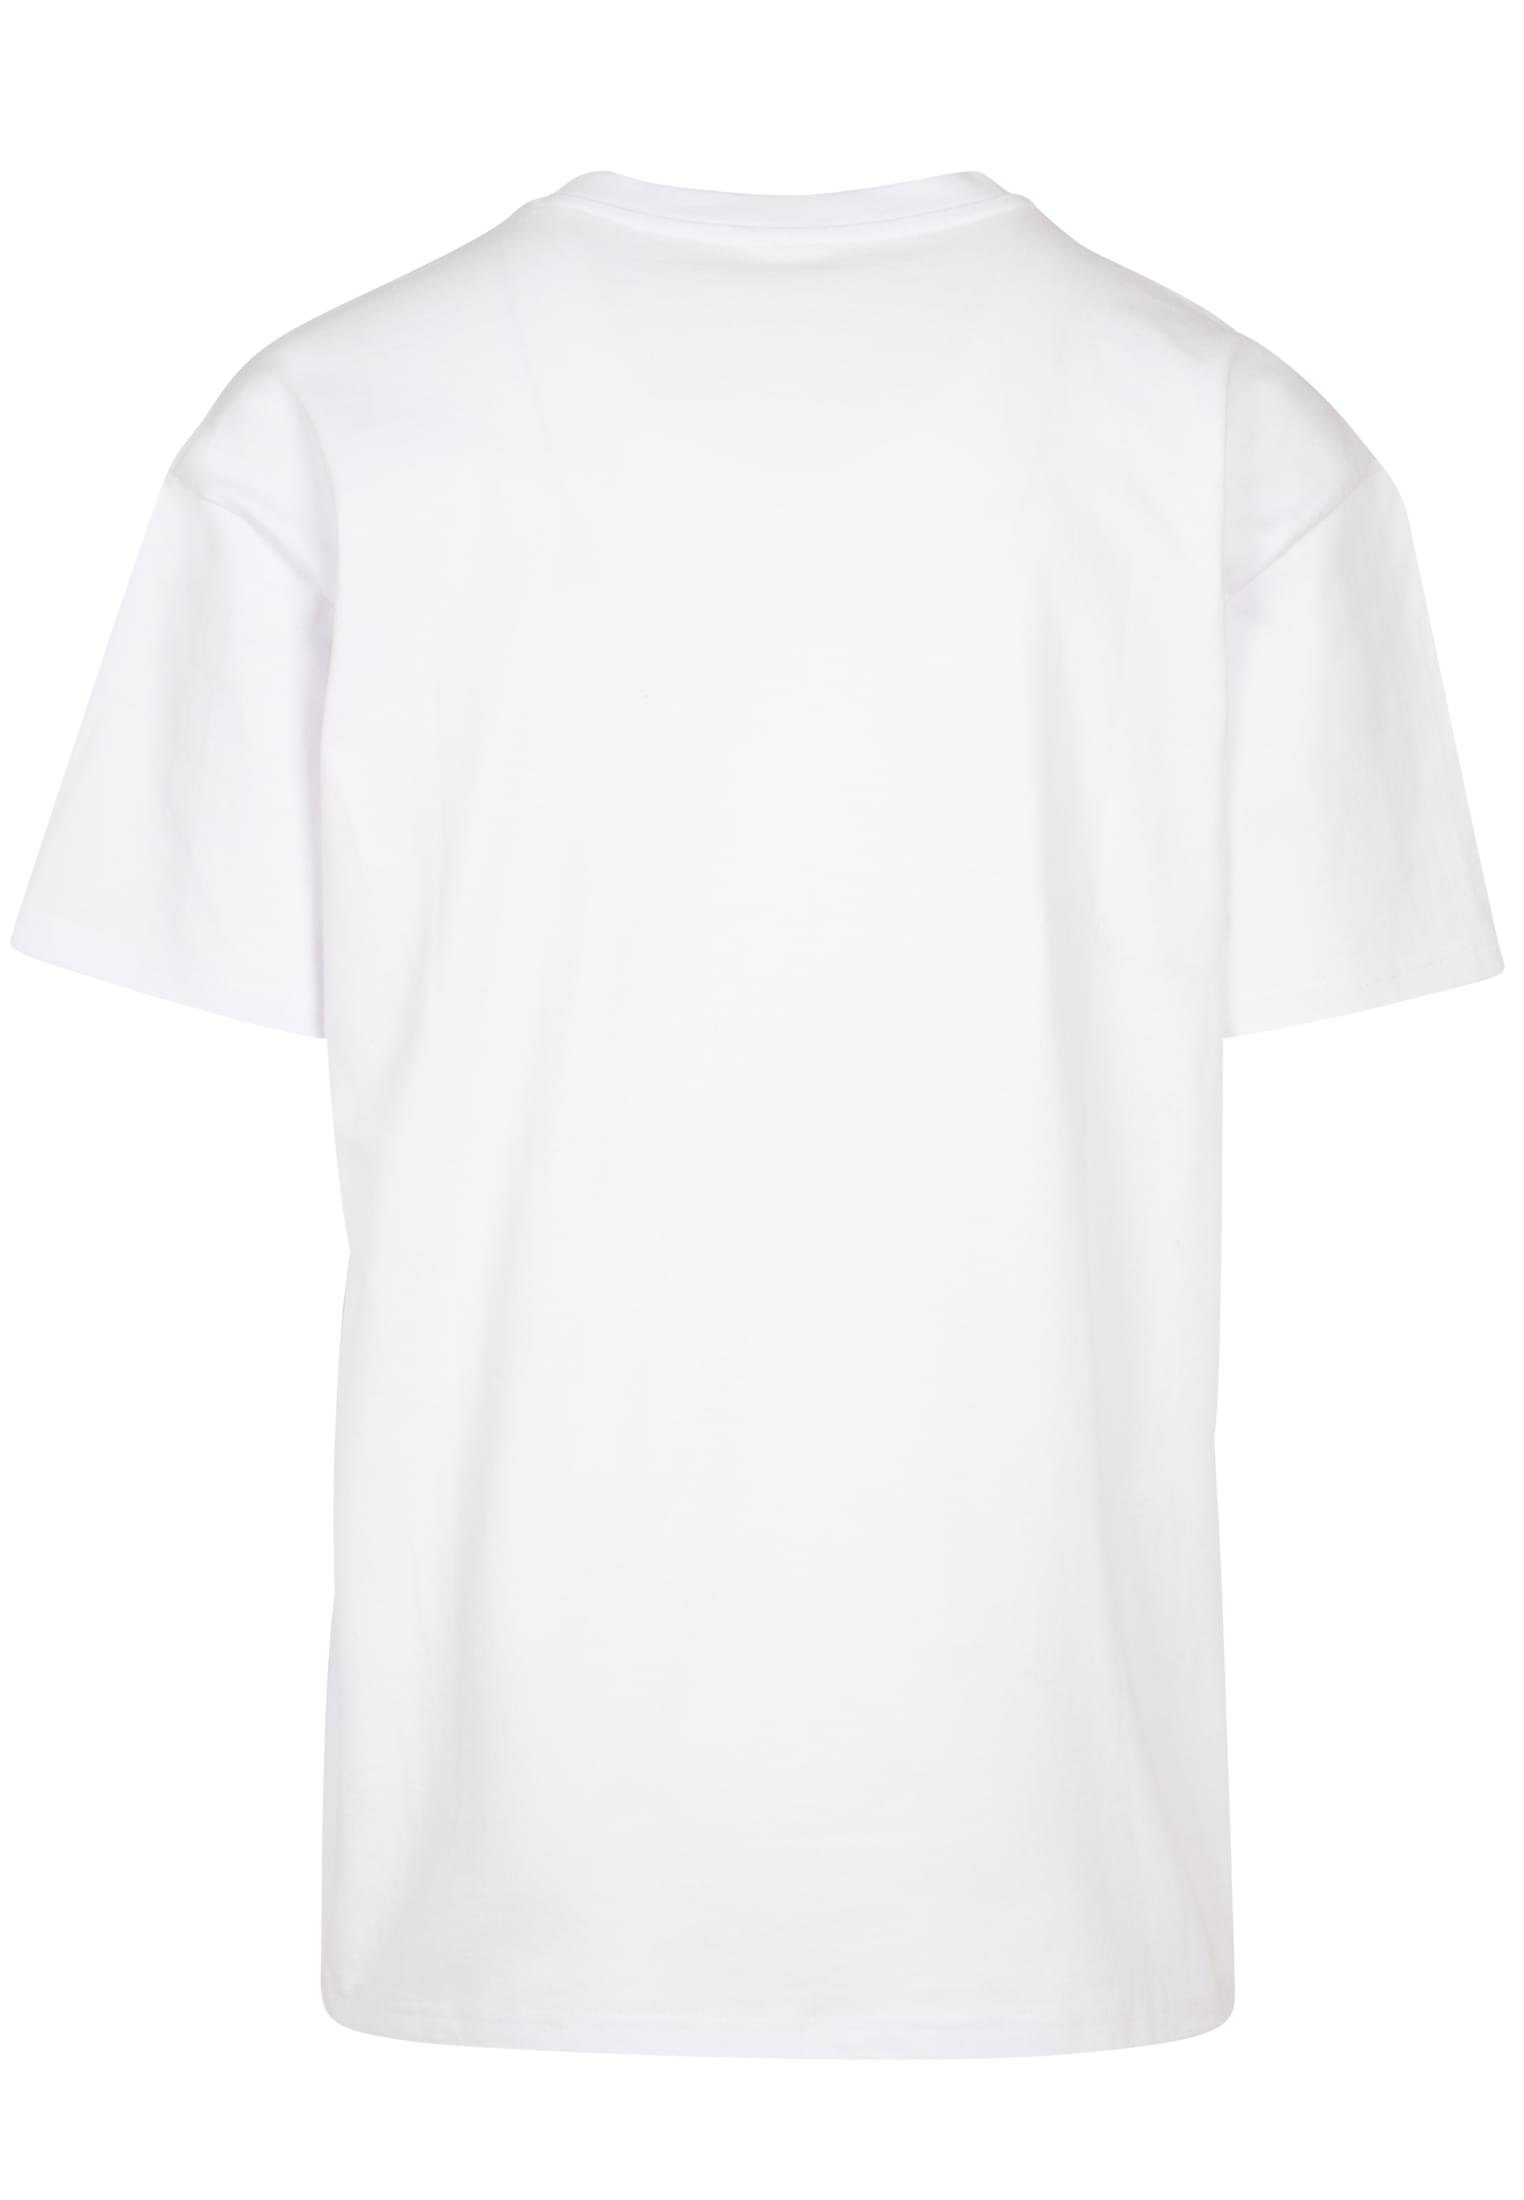 Tee in (1-tlg) Tee Peace Kurzarmshirt white Mister Live Upscale Herren Oversize by